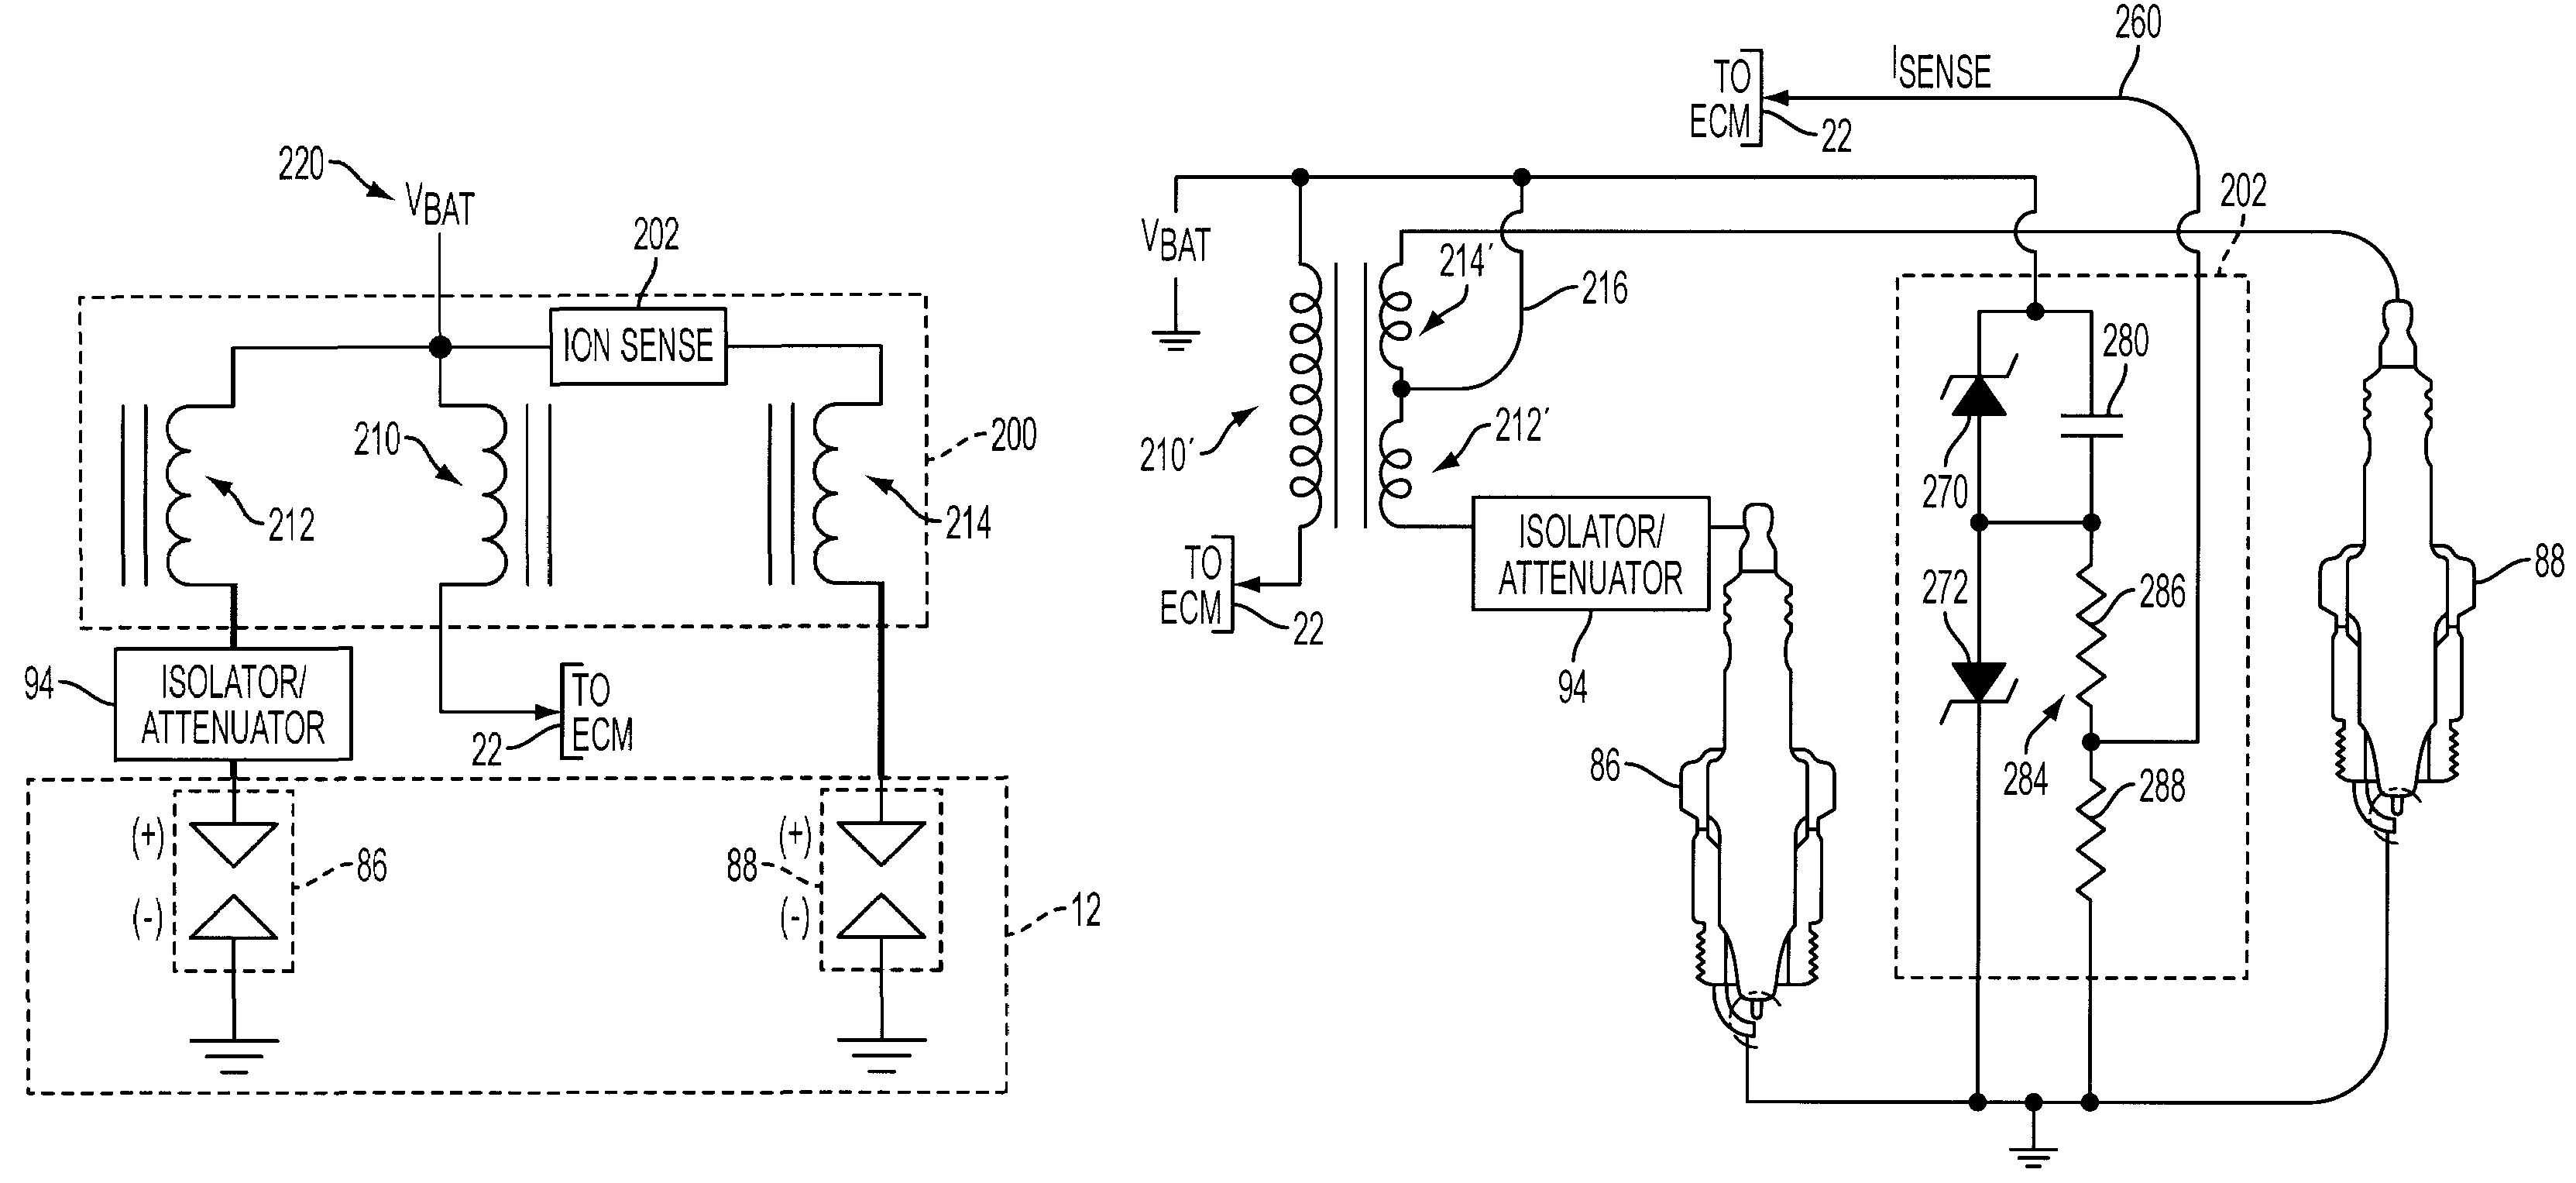 Internal combustion engine with multiple spark plugs per cylinder and ion current sensing